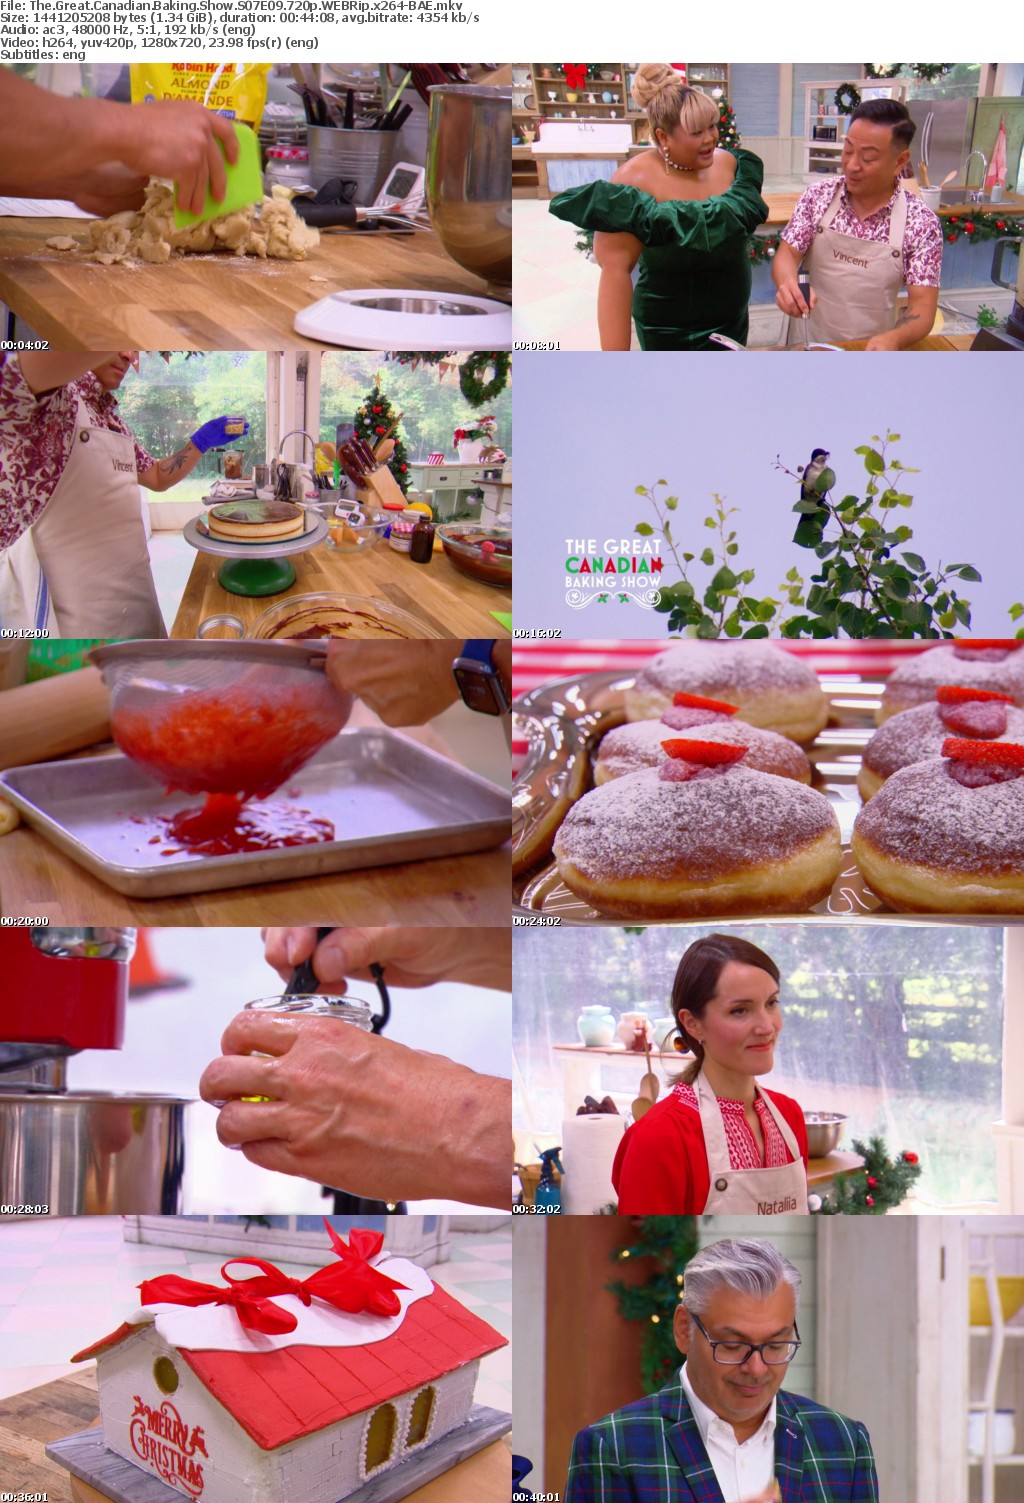 The Great Canadian Baking Show S07E09 720p WEBRip x264-BAE